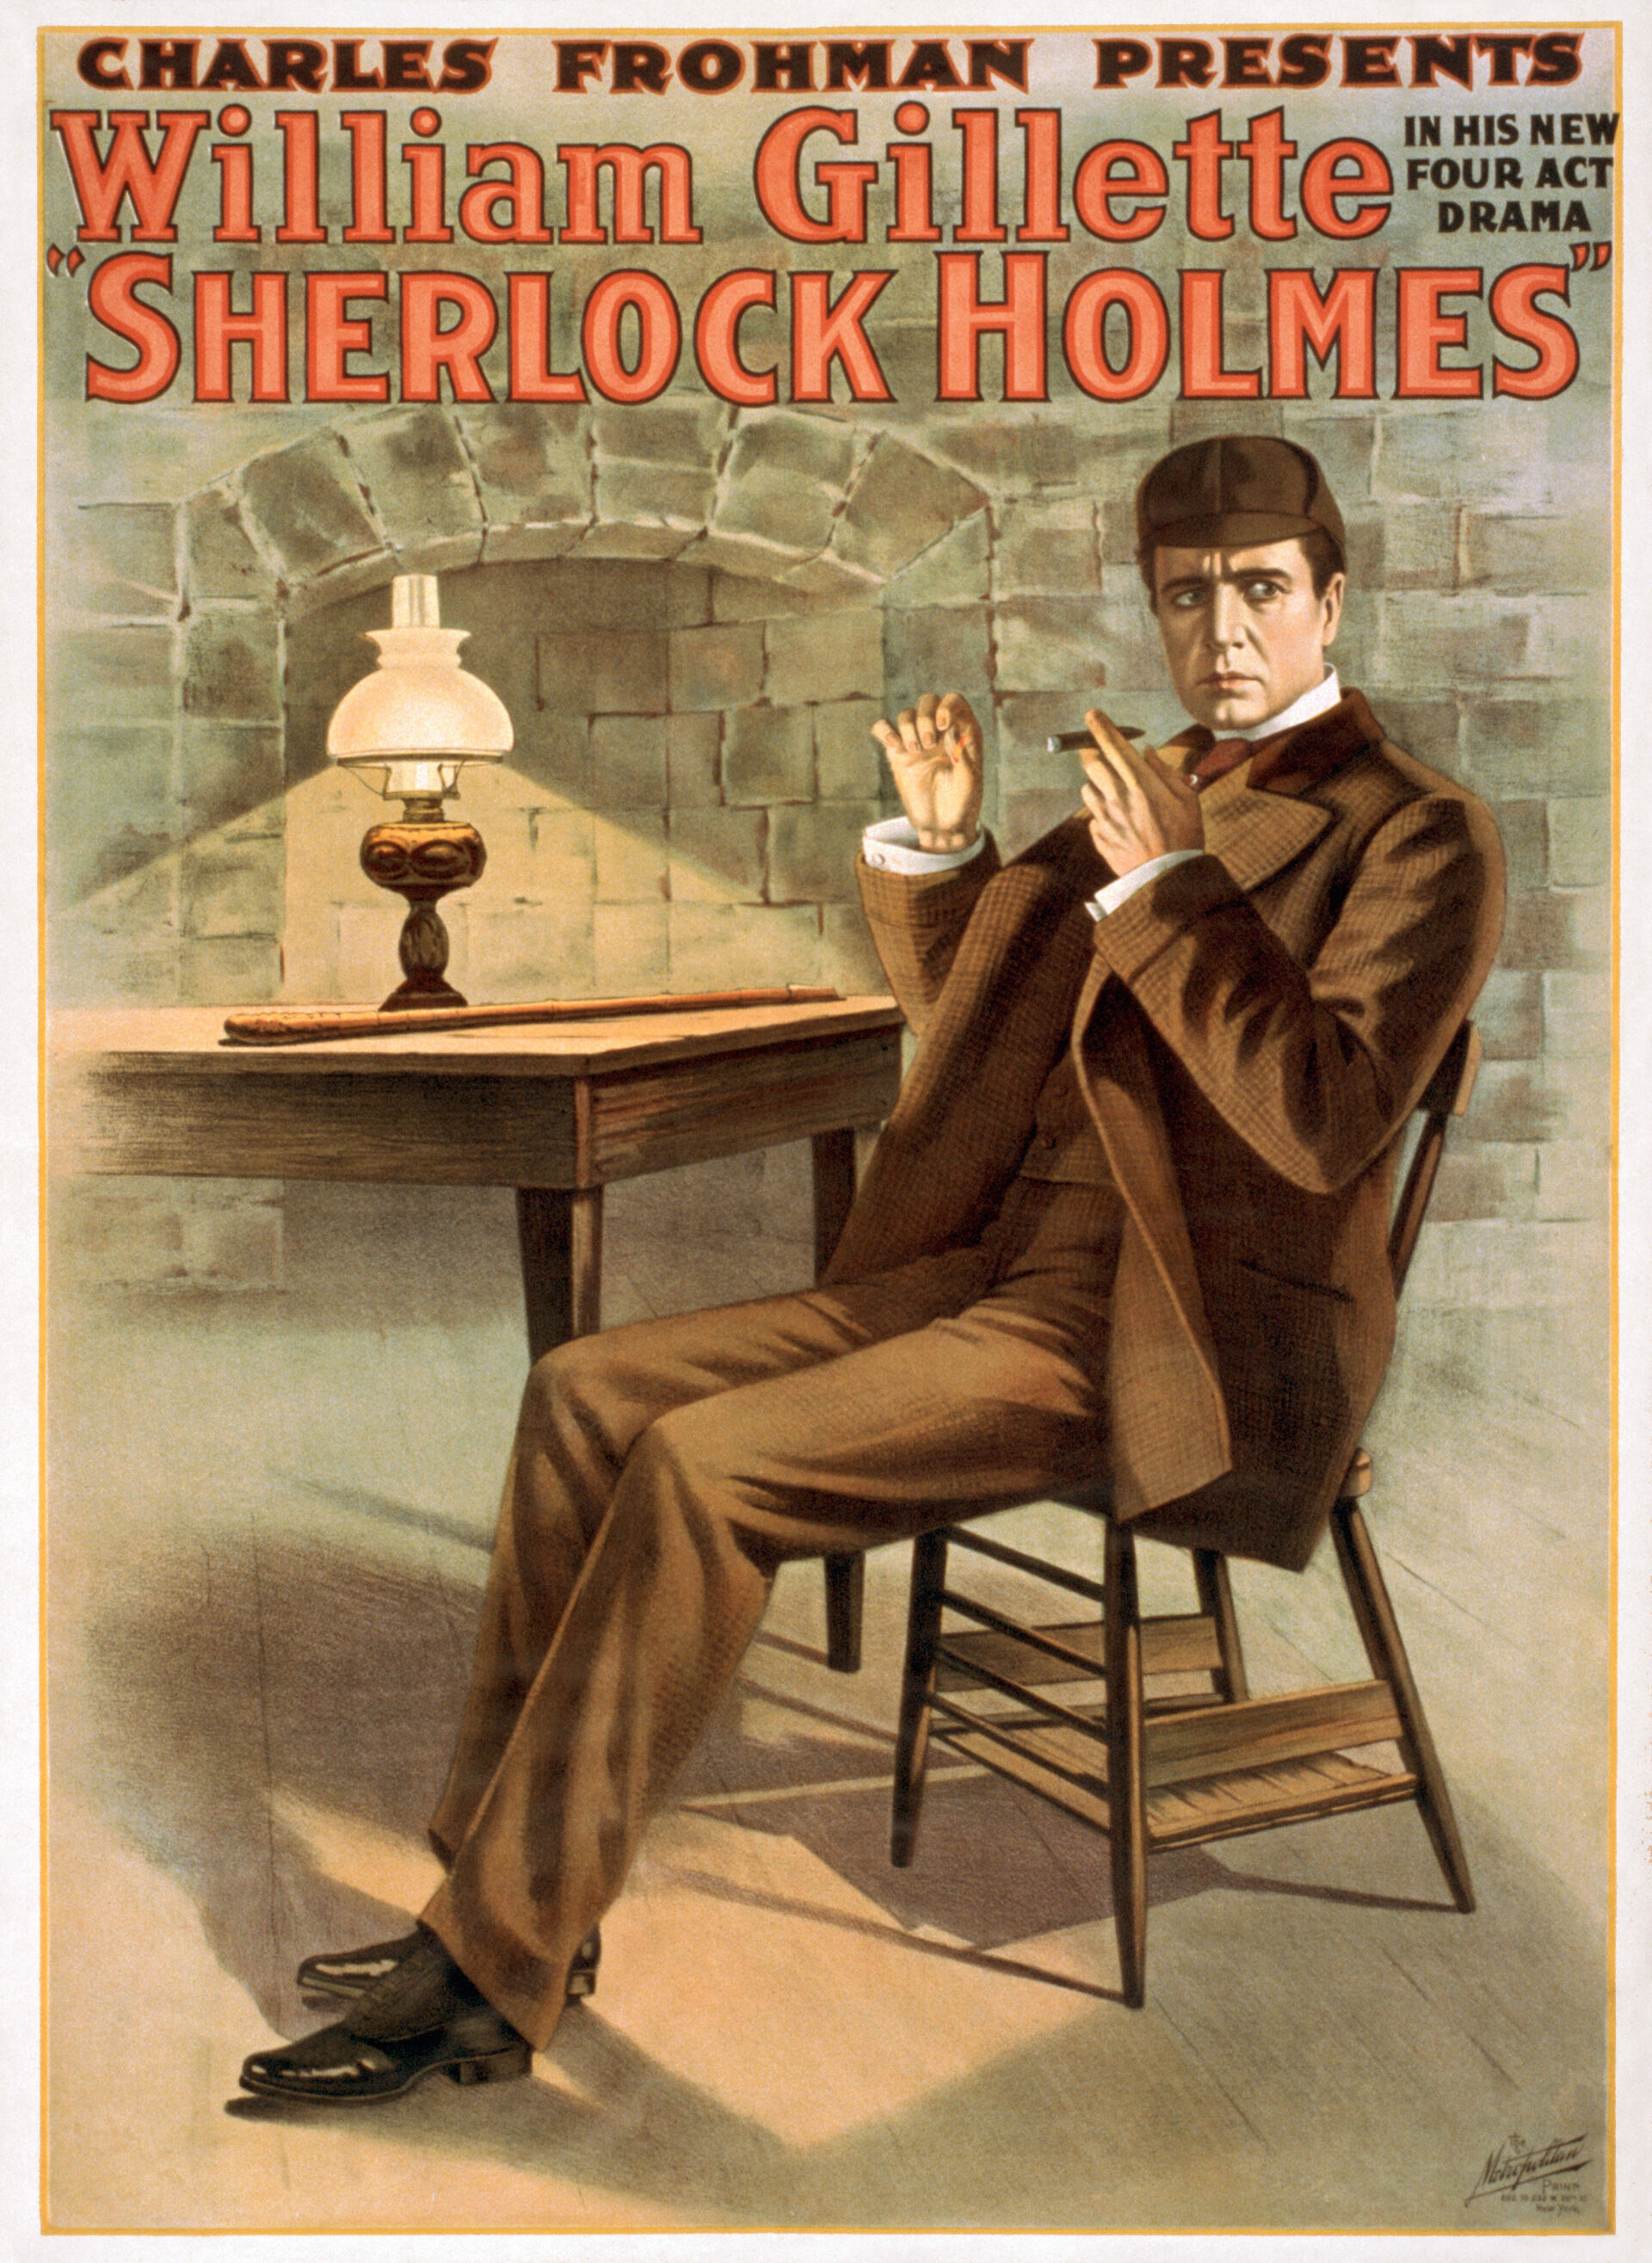 Laurie Booksellers on X: On May 19, 1934 the Sherlock Holmes